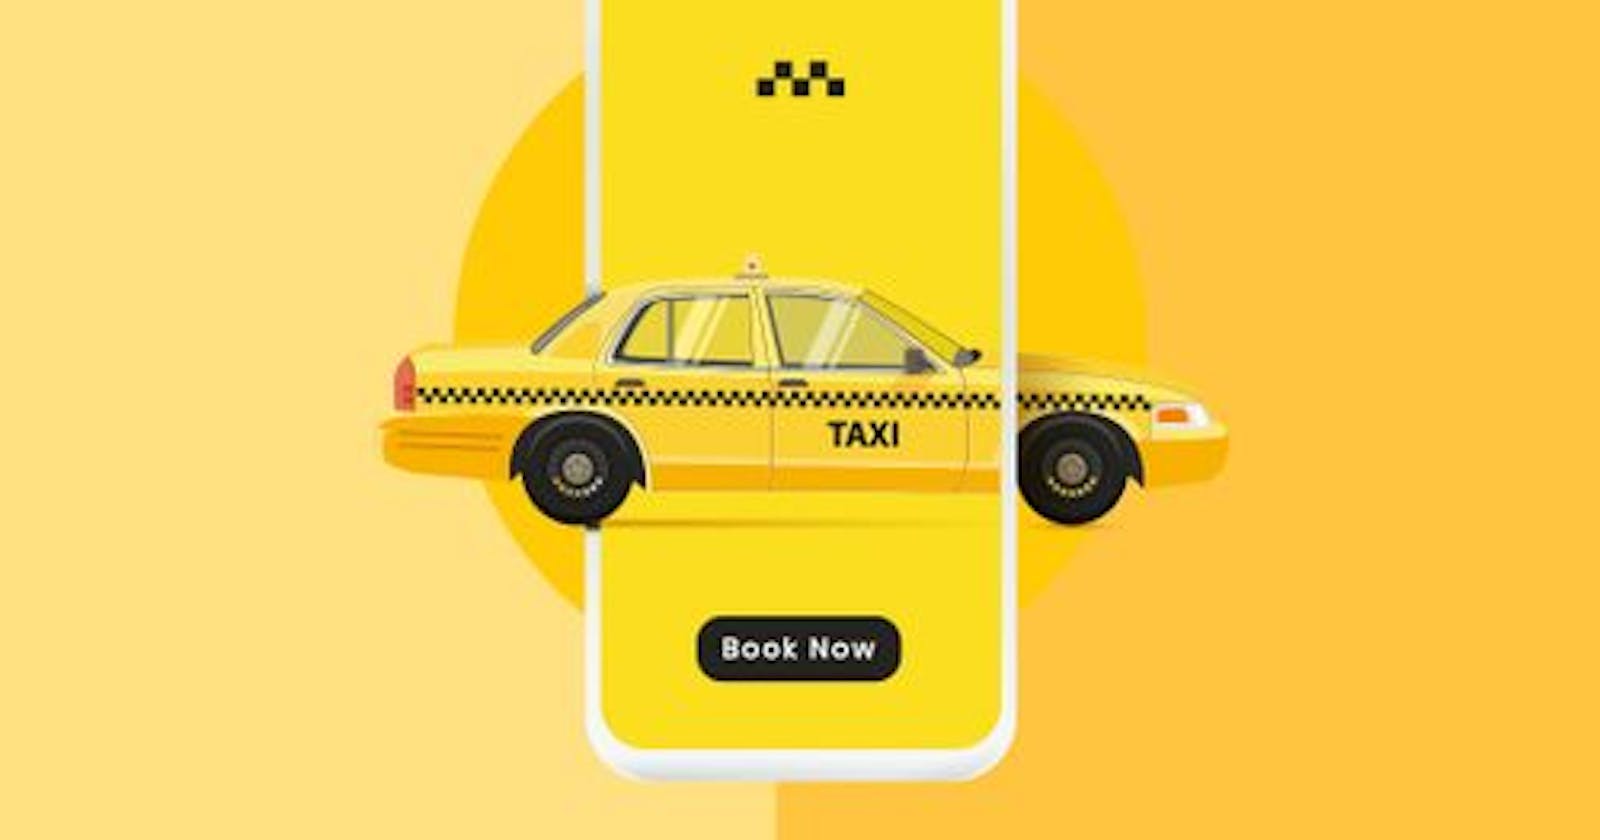 A Complete cost to build a Taxi App like Uber in 2022